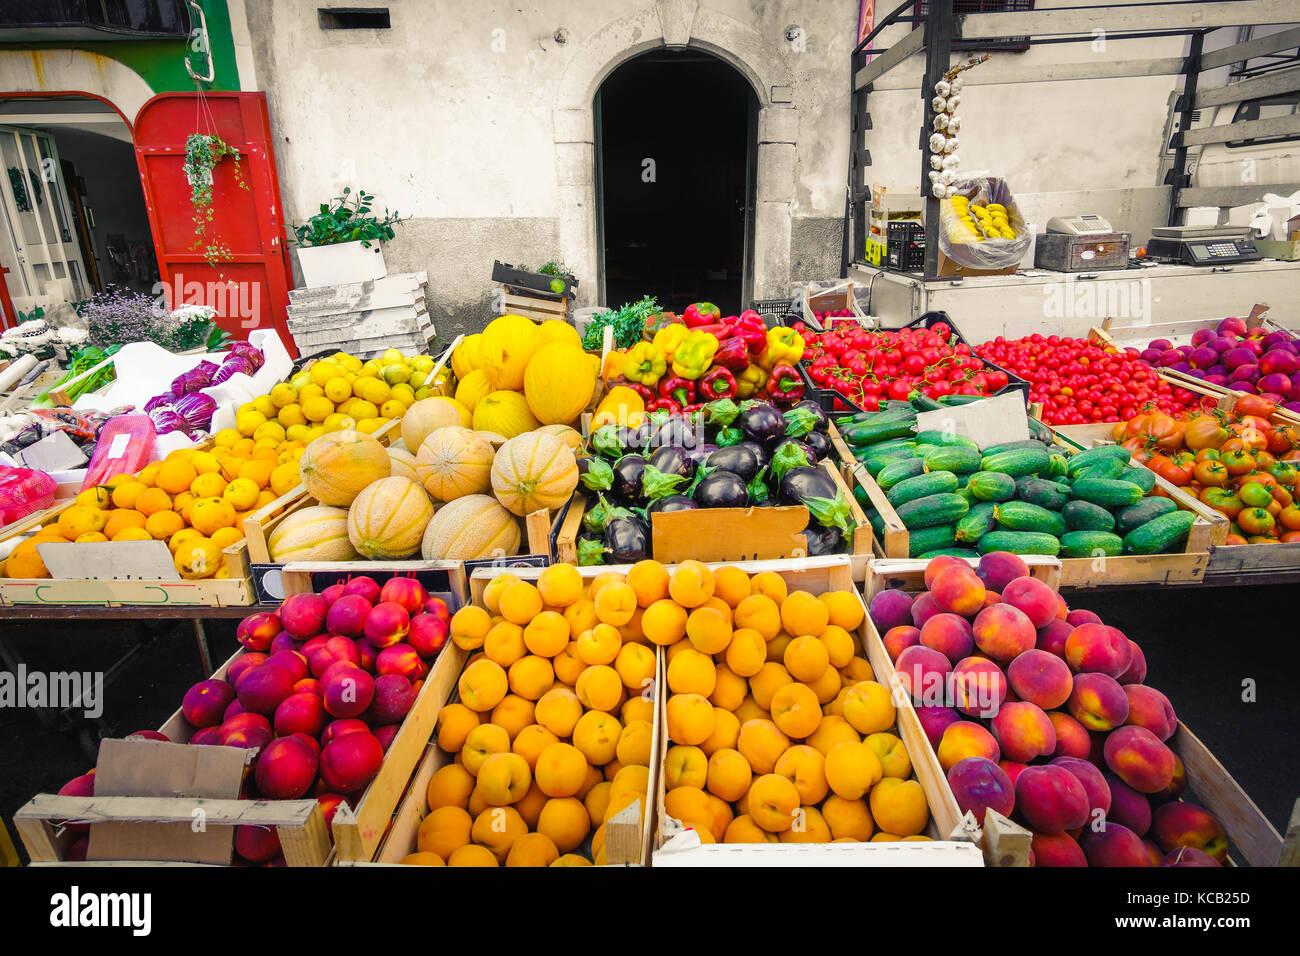 local market greengrocery food miles fruits and vegetable shelves Stock Photo